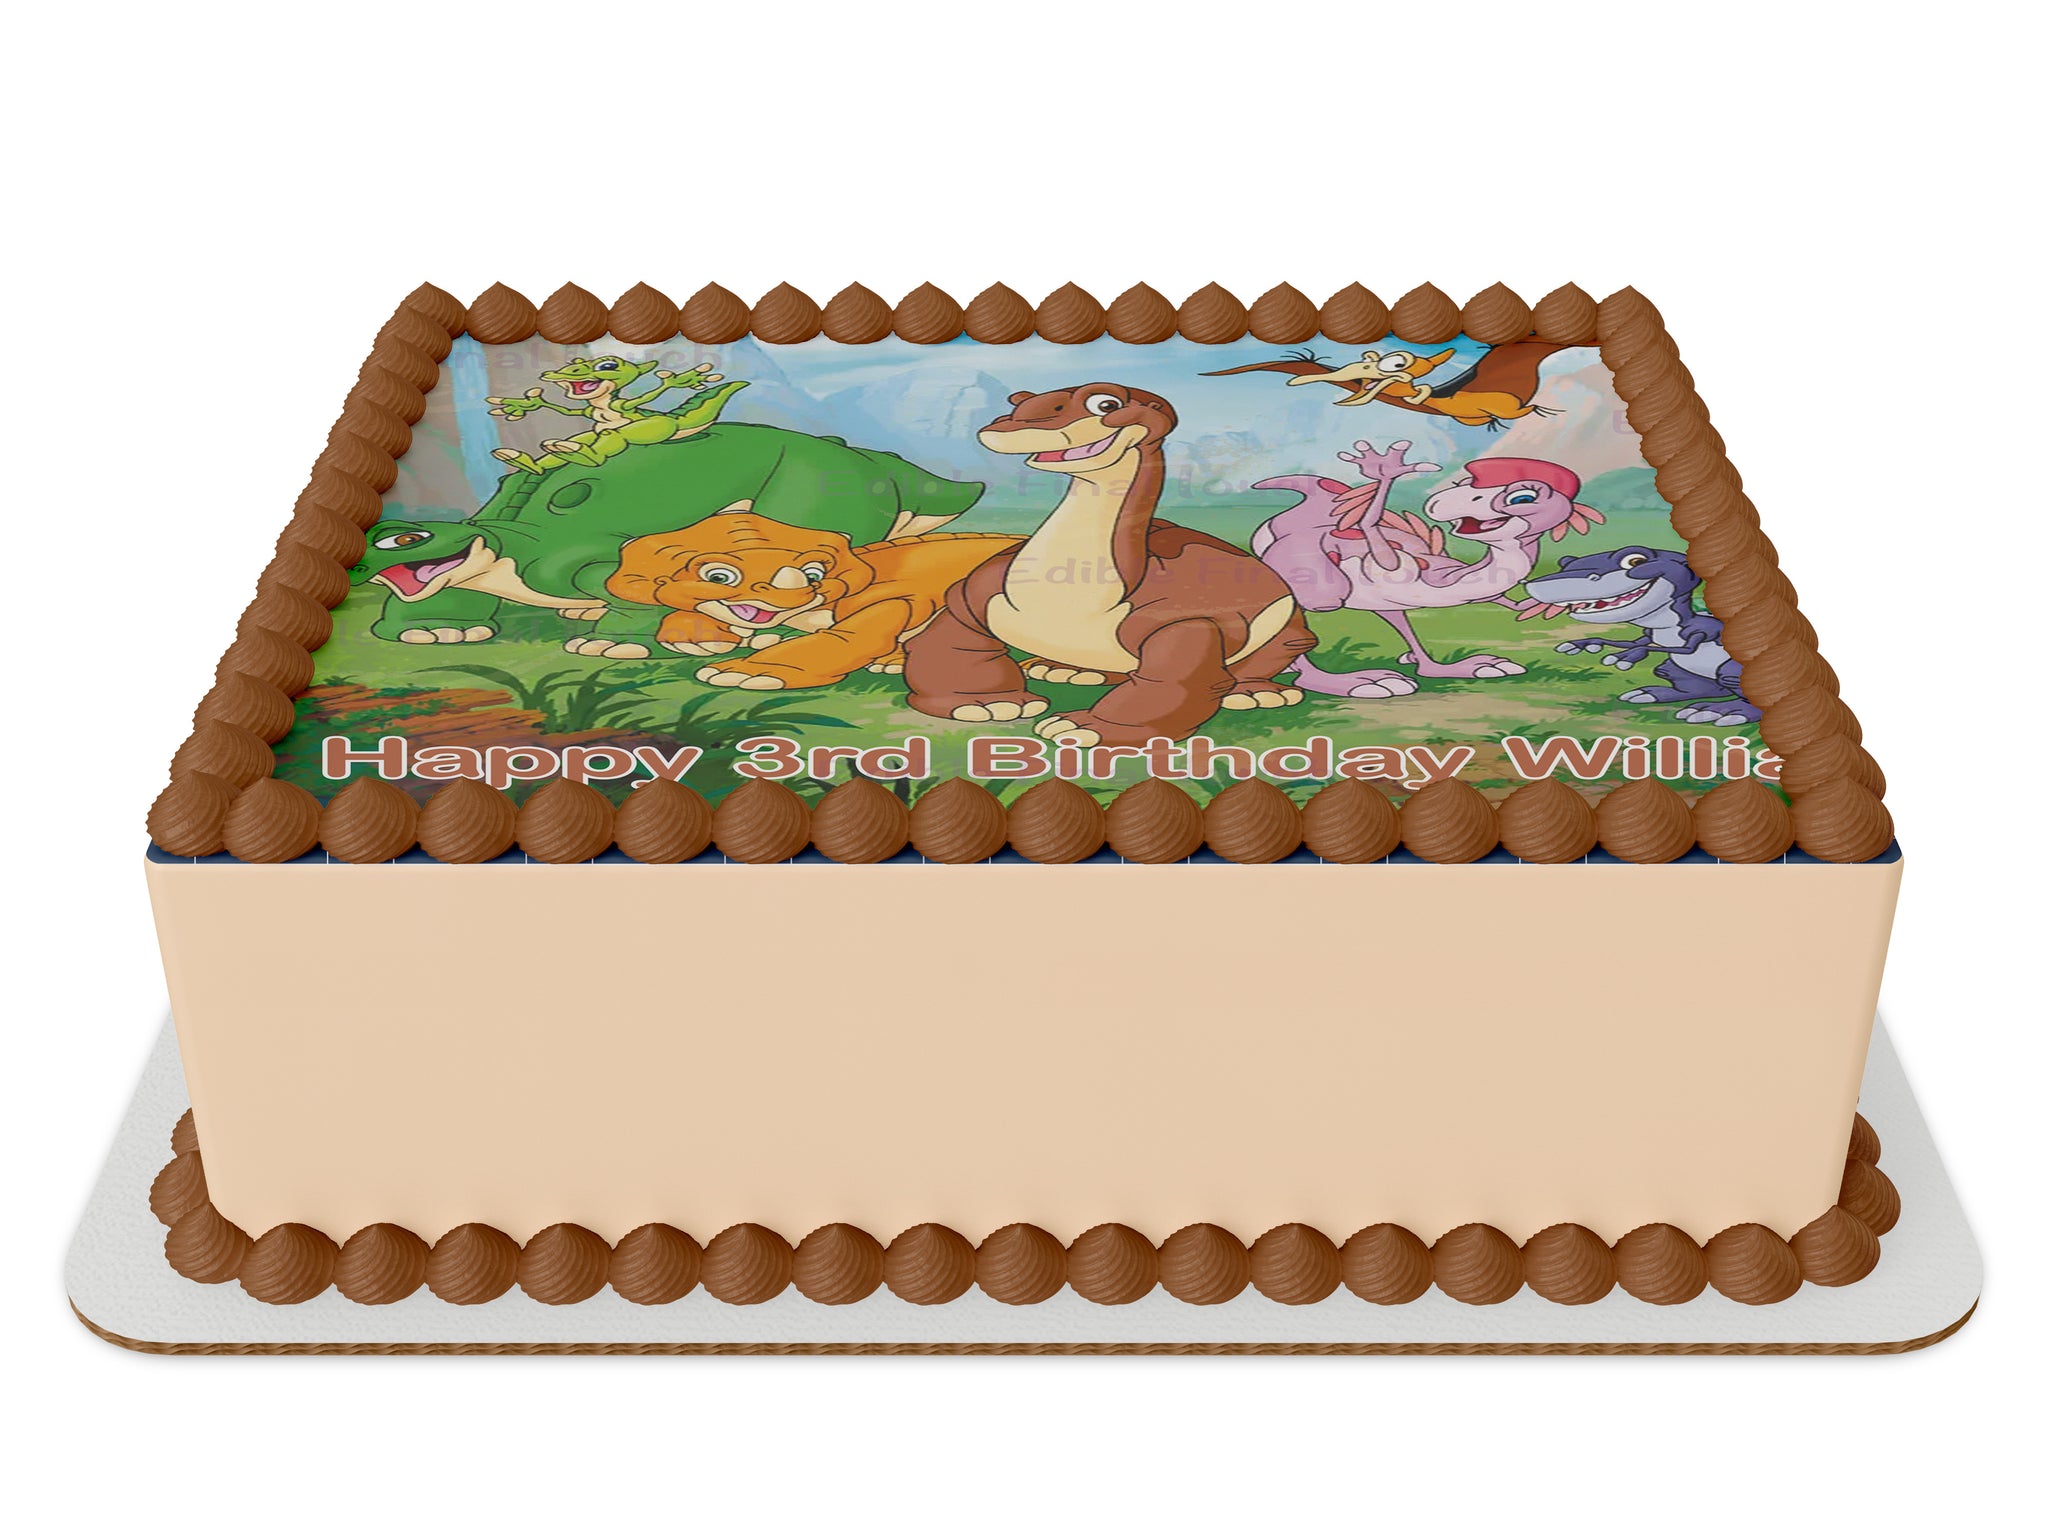 Order Photo Cake Online | Custom Photo Printed Cake Delivery